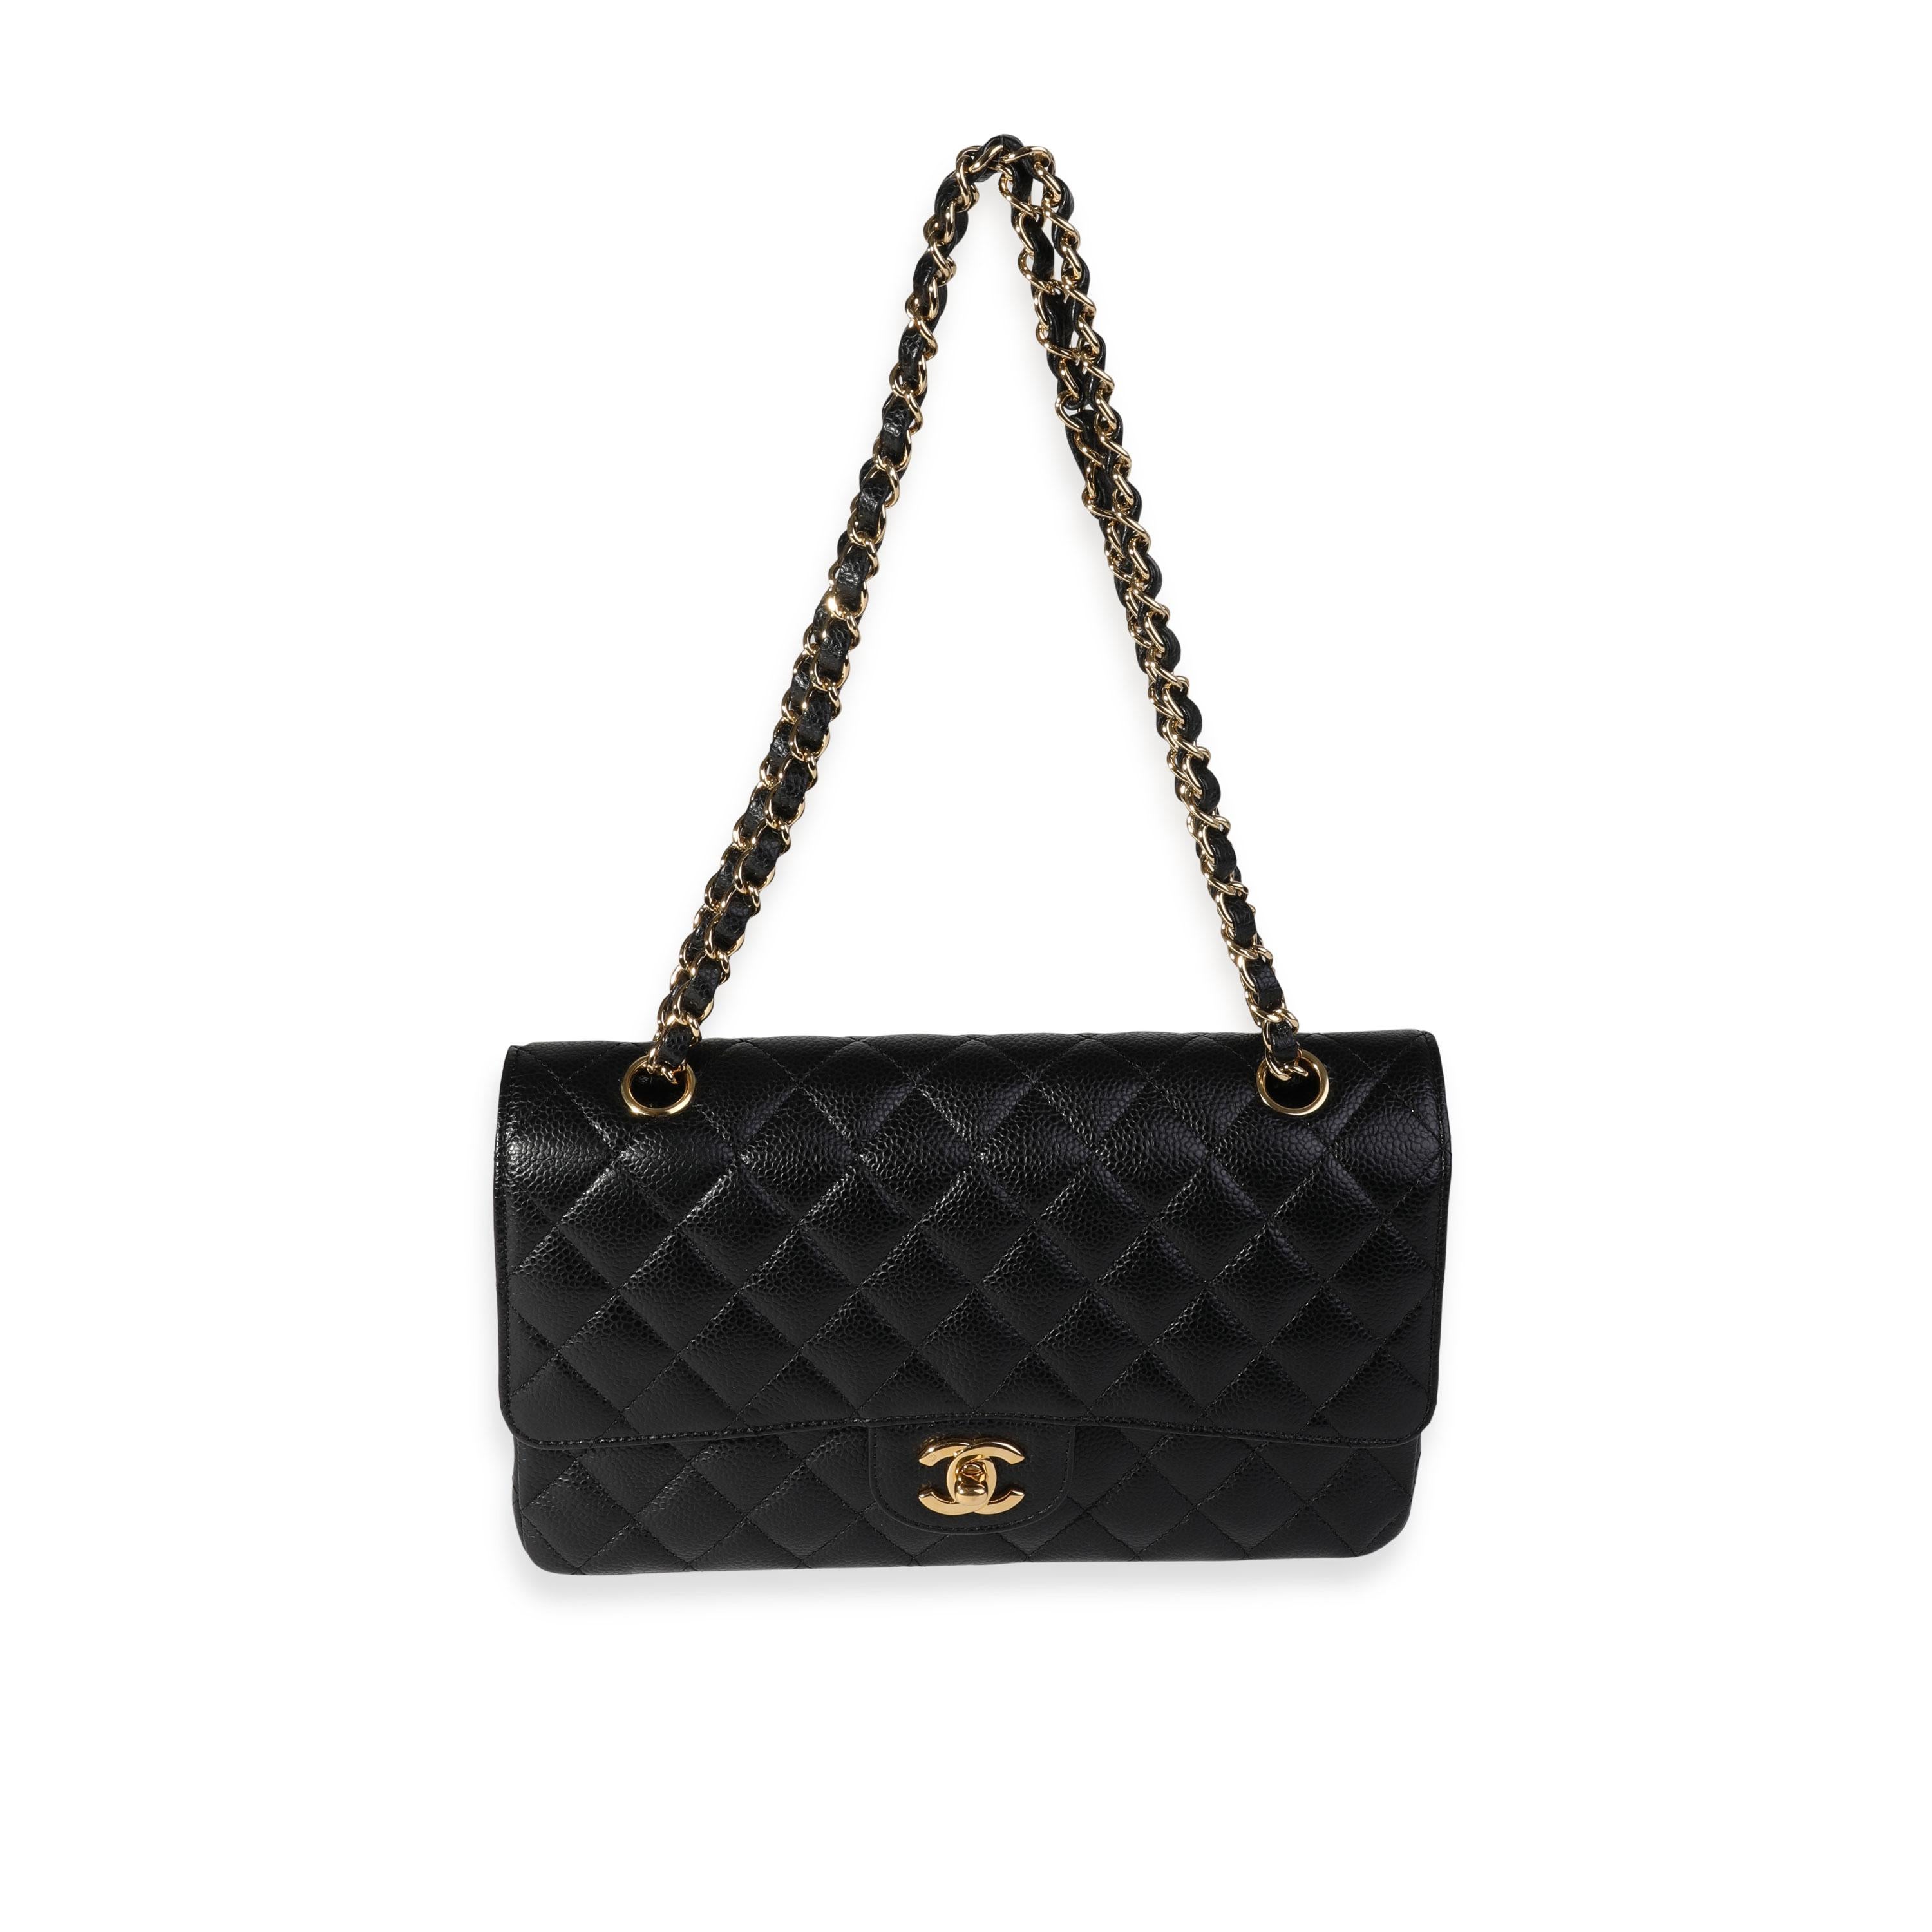 Listing Title: Chanel Black Quilted Caviar Medium Classic Double Flap Bag
SKU: 120545
MSRP: 8800.00
Condition: Pre-owned 
Handbag Condition: Very Good
Condition Comments: Very Good Condition. Light scuffing to exterior. Scratching to hardware.